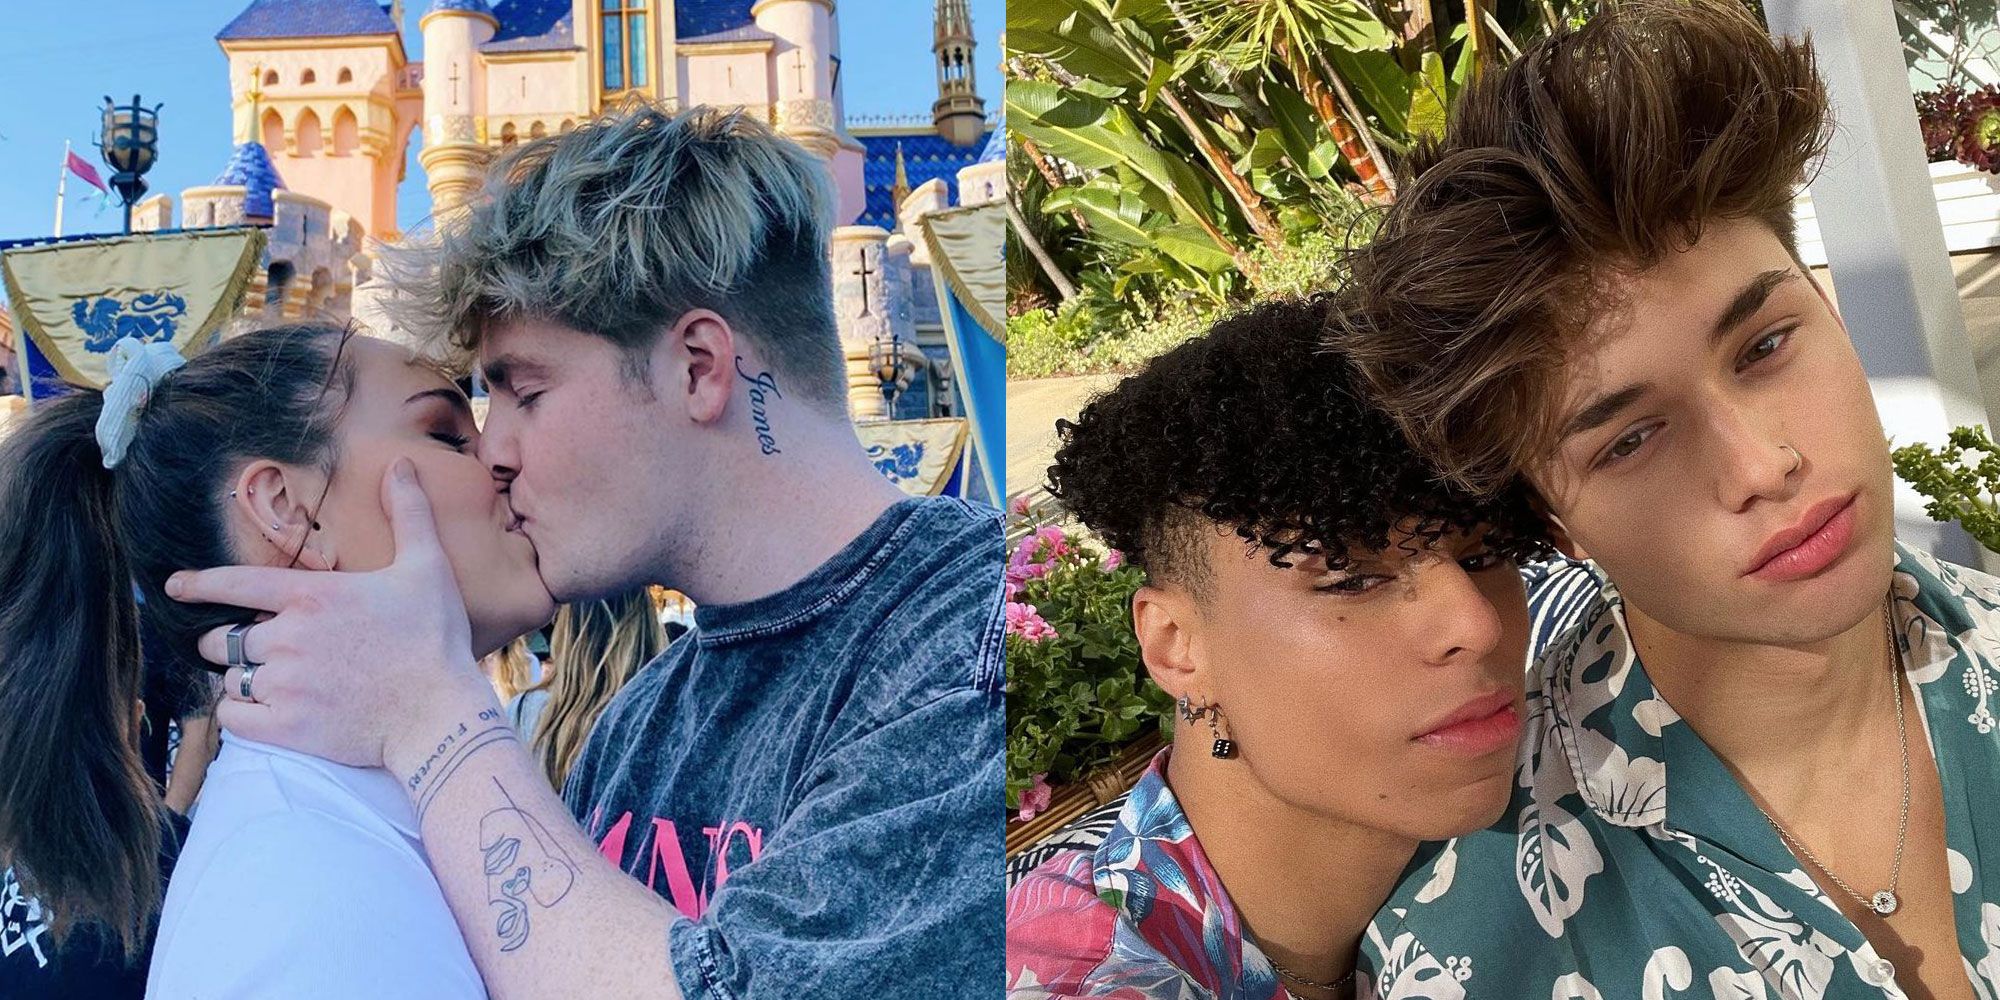 Who Are the Couples In the TikTok Hype House? - TikTok Hype House Members